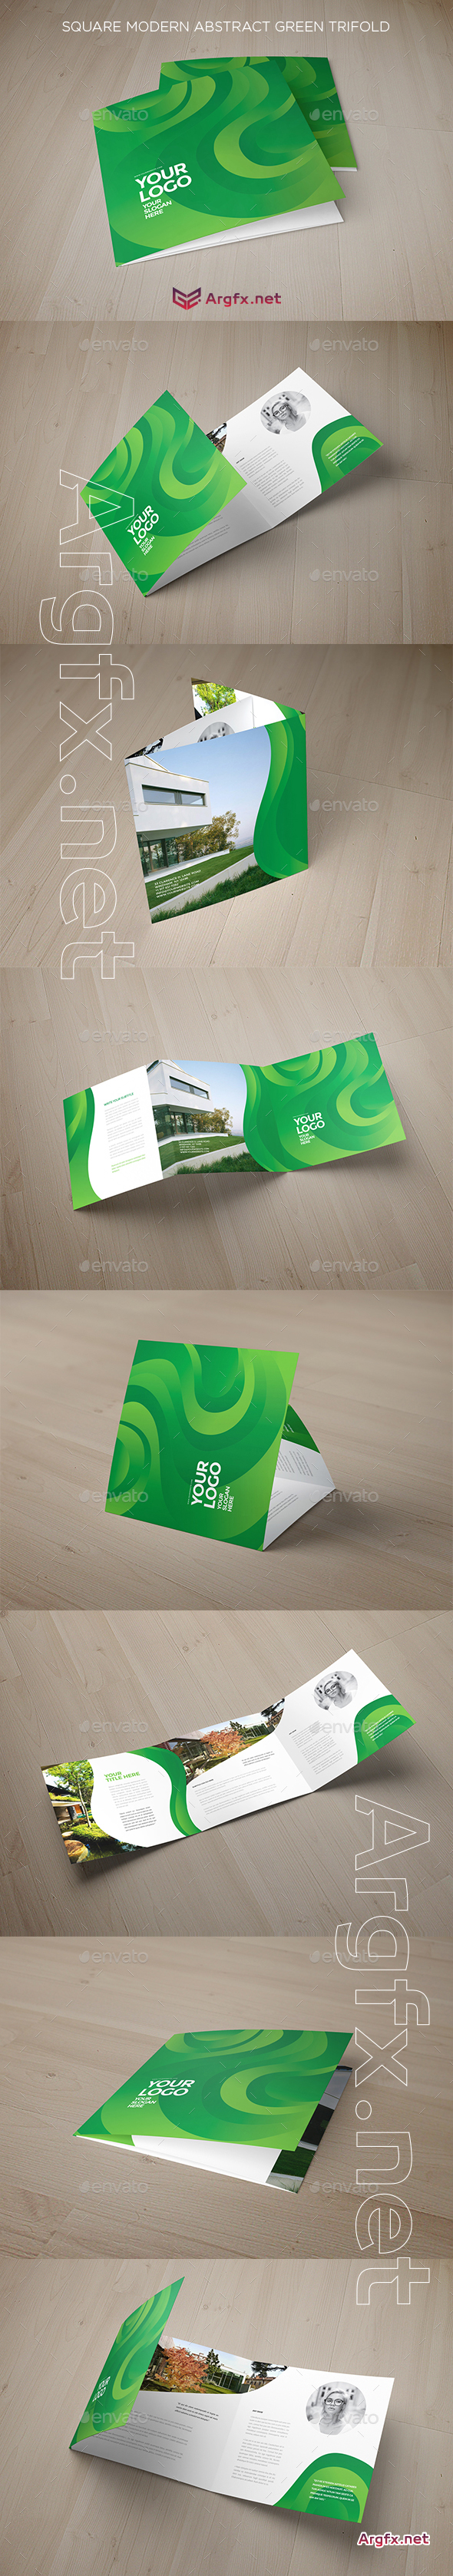 GraphicRiver - Square Modern Abstract Green Trifold 19215341